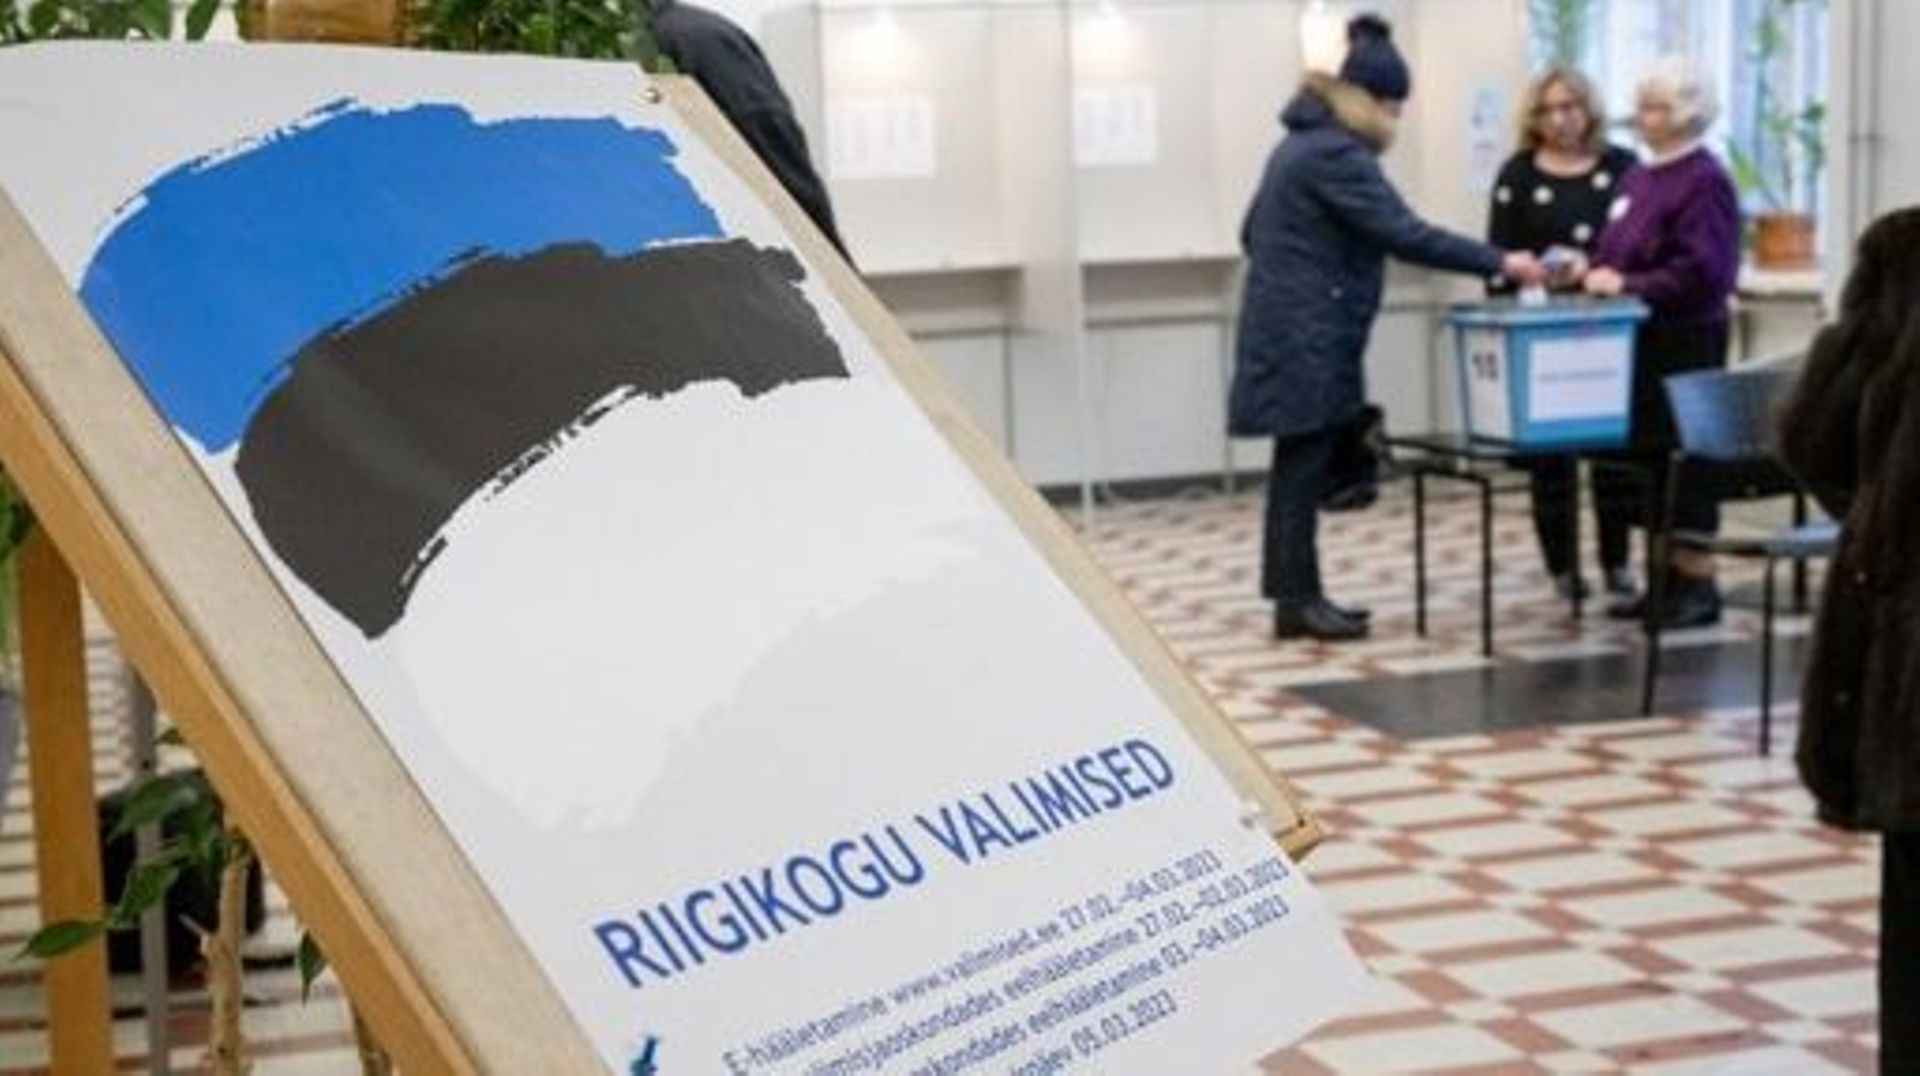 A man cast his vote at a polling station at the University of Tallinn, Estonia on March 5, 2023 during parliamentary elections. According to the polls, the elections are set to be won by the Reform Party of Prime Minister Kaja Kallas, who has led internat